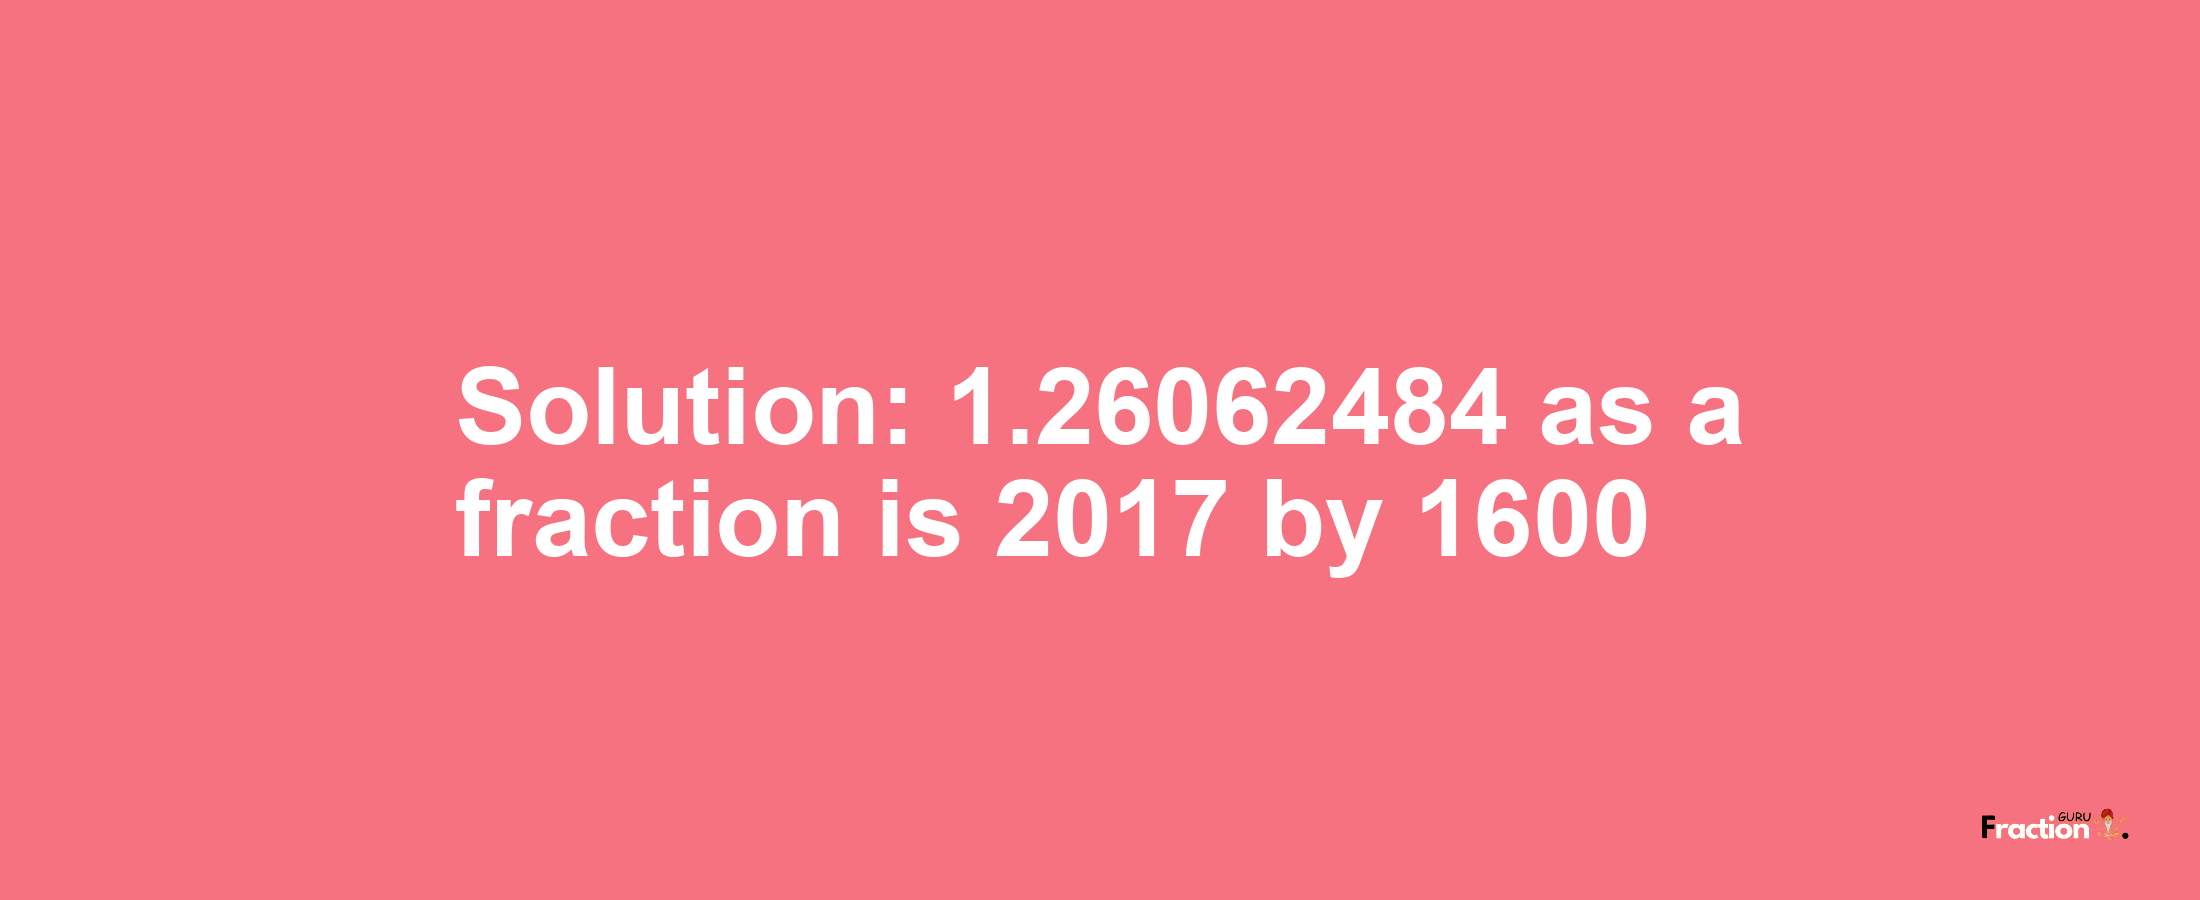 Solution:1.26062484 as a fraction is 2017/1600